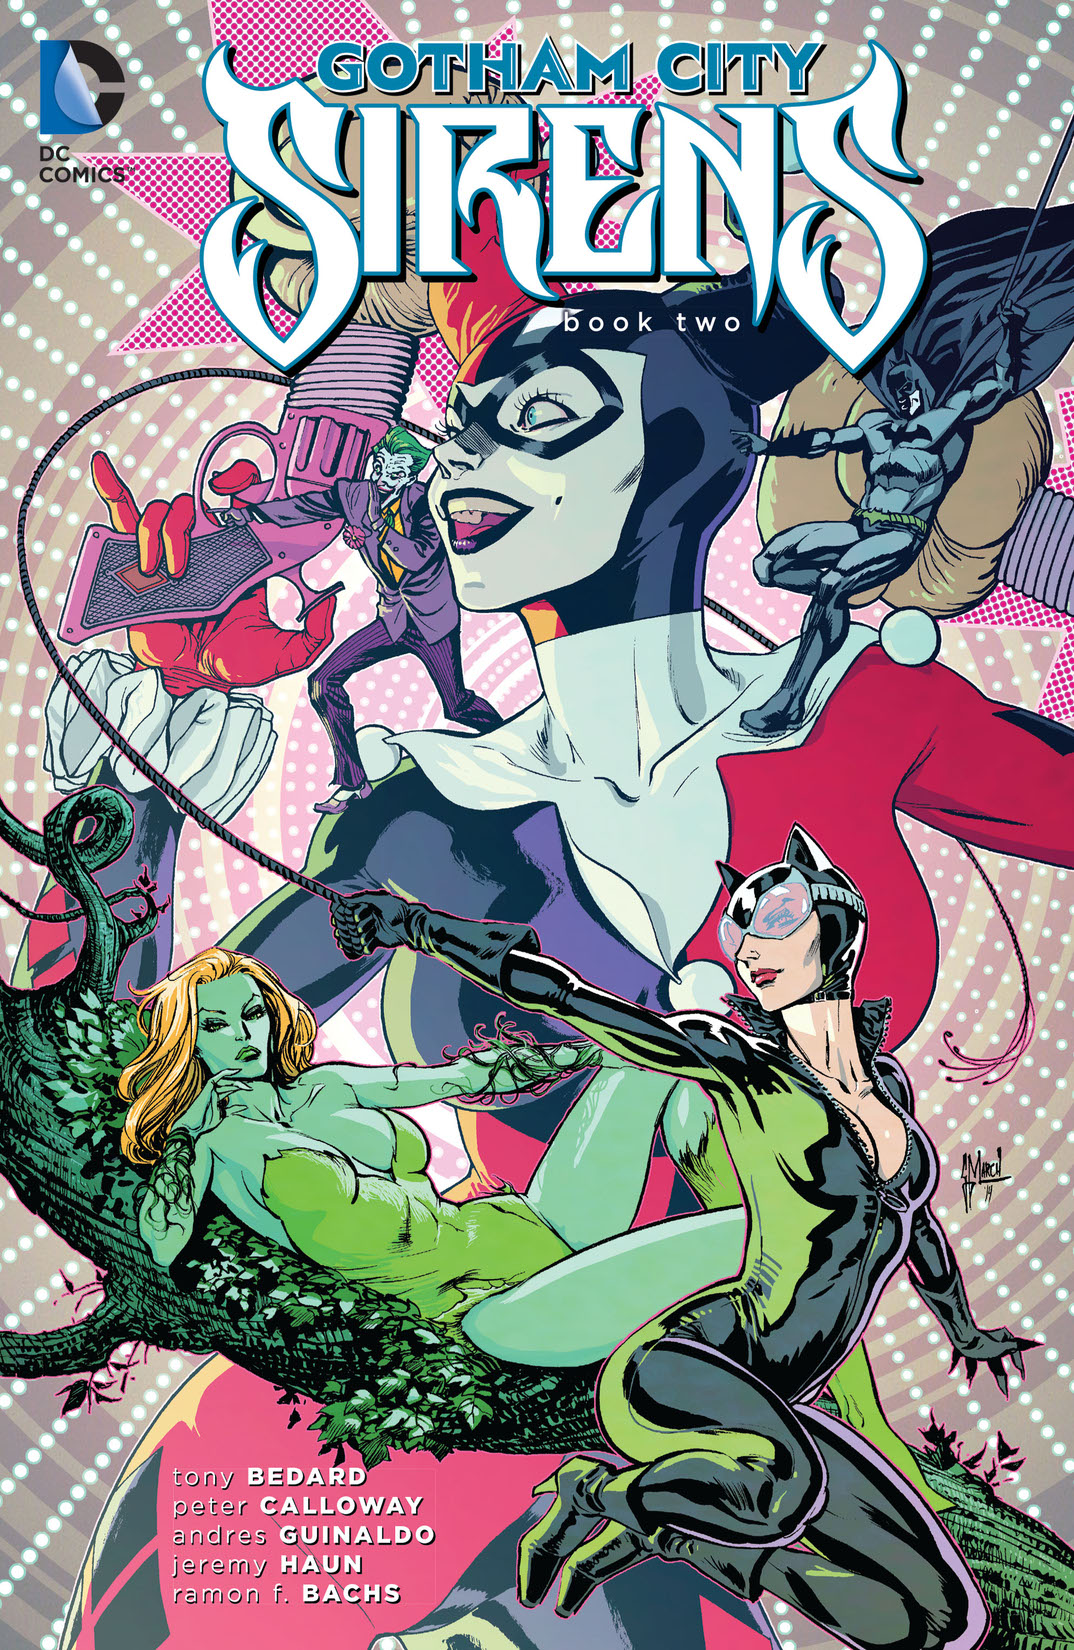 Gotham City Sirens Book Two preview images